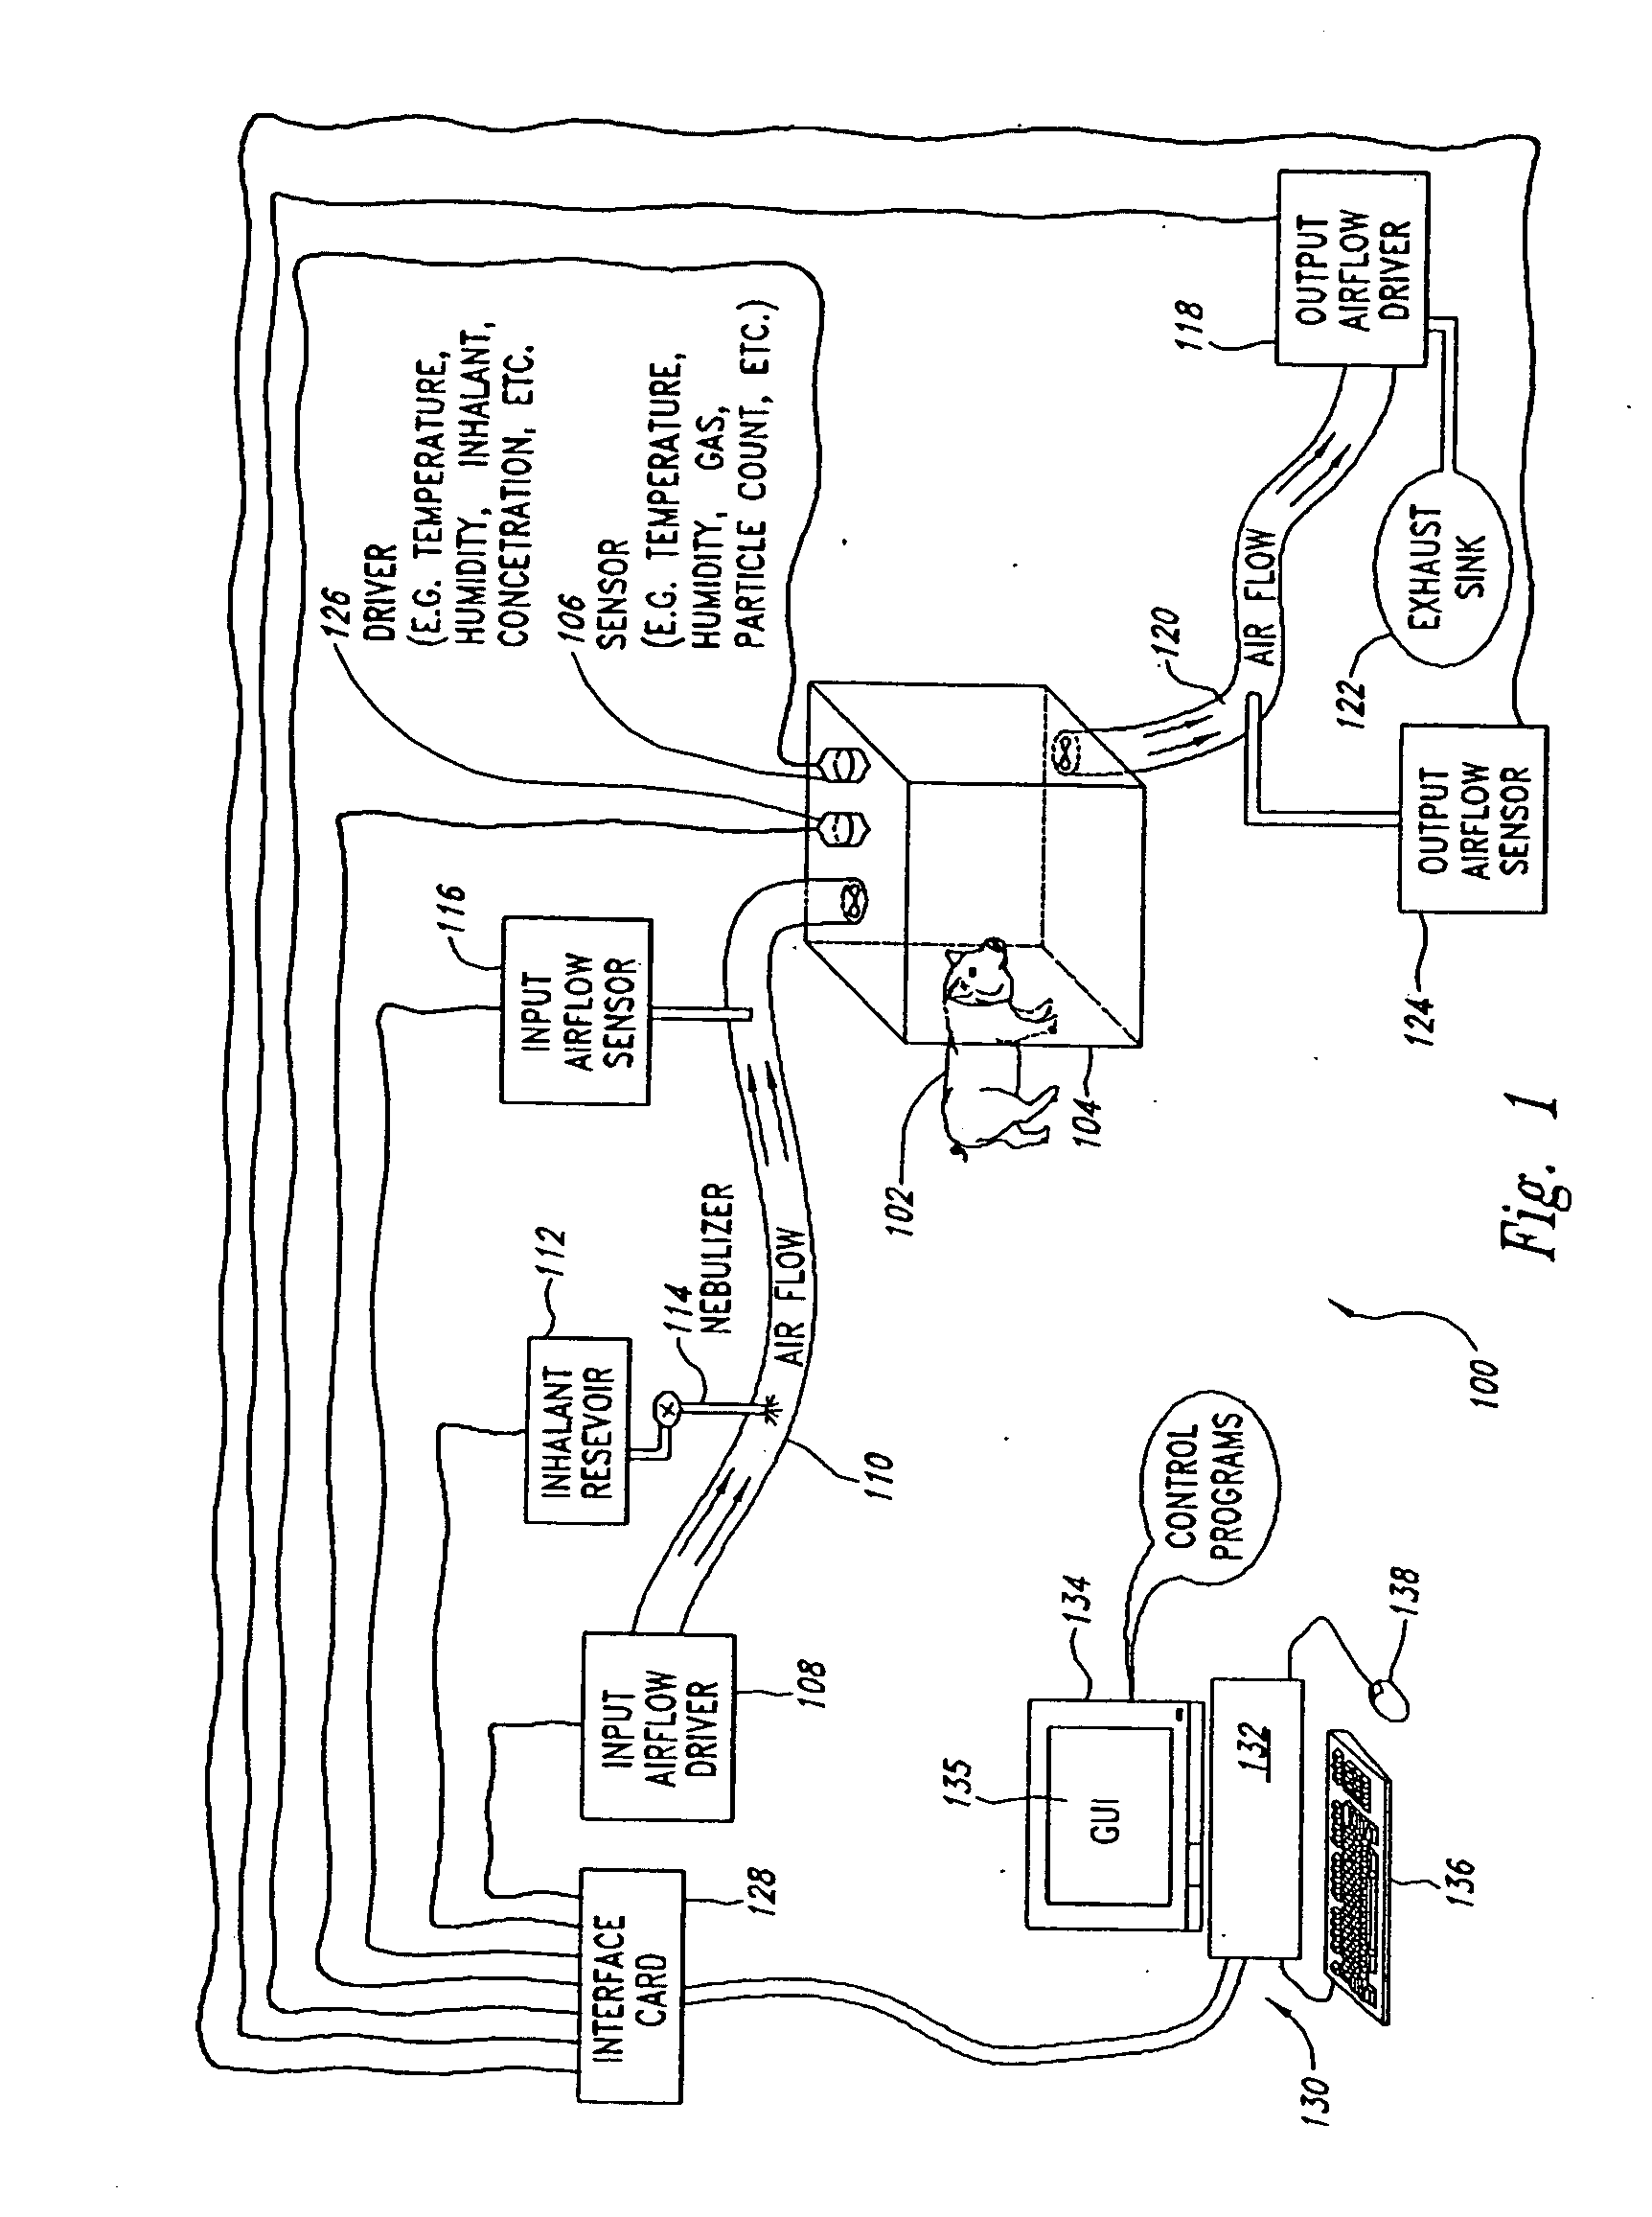 Automated inhalation toxicology exposure system and method